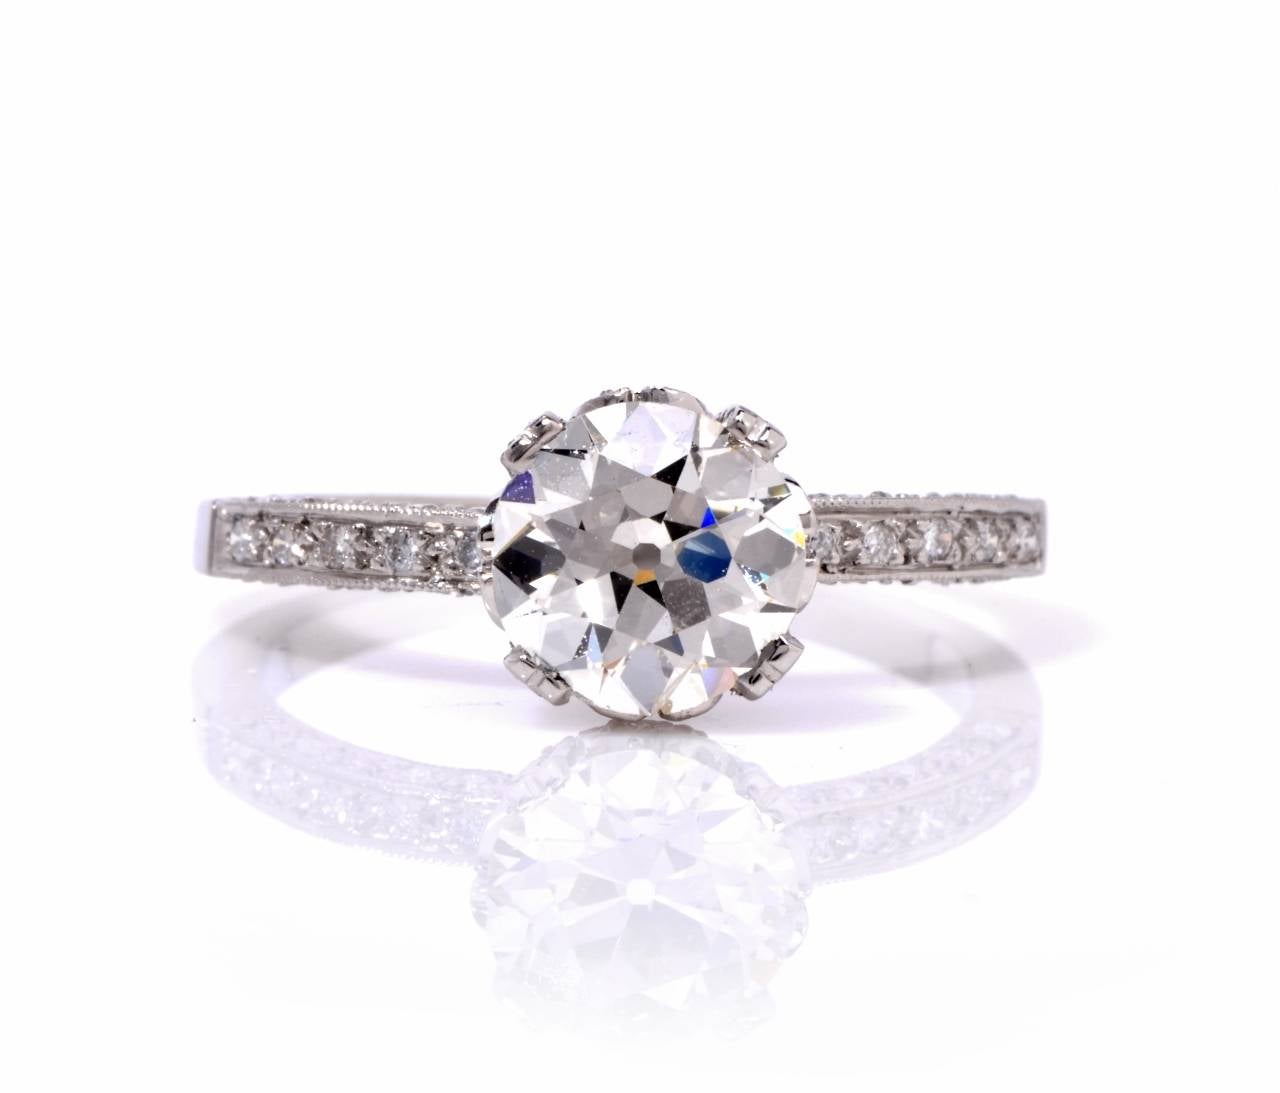 This vintage engagement ring with notable  brilliance and classic distinction   is  crafted in solid platinum, exposing a  genuine old European cut diamond of approx. 1.58 cts,  graded I color and VS clarity. An assemblage of 51 genuine round cut